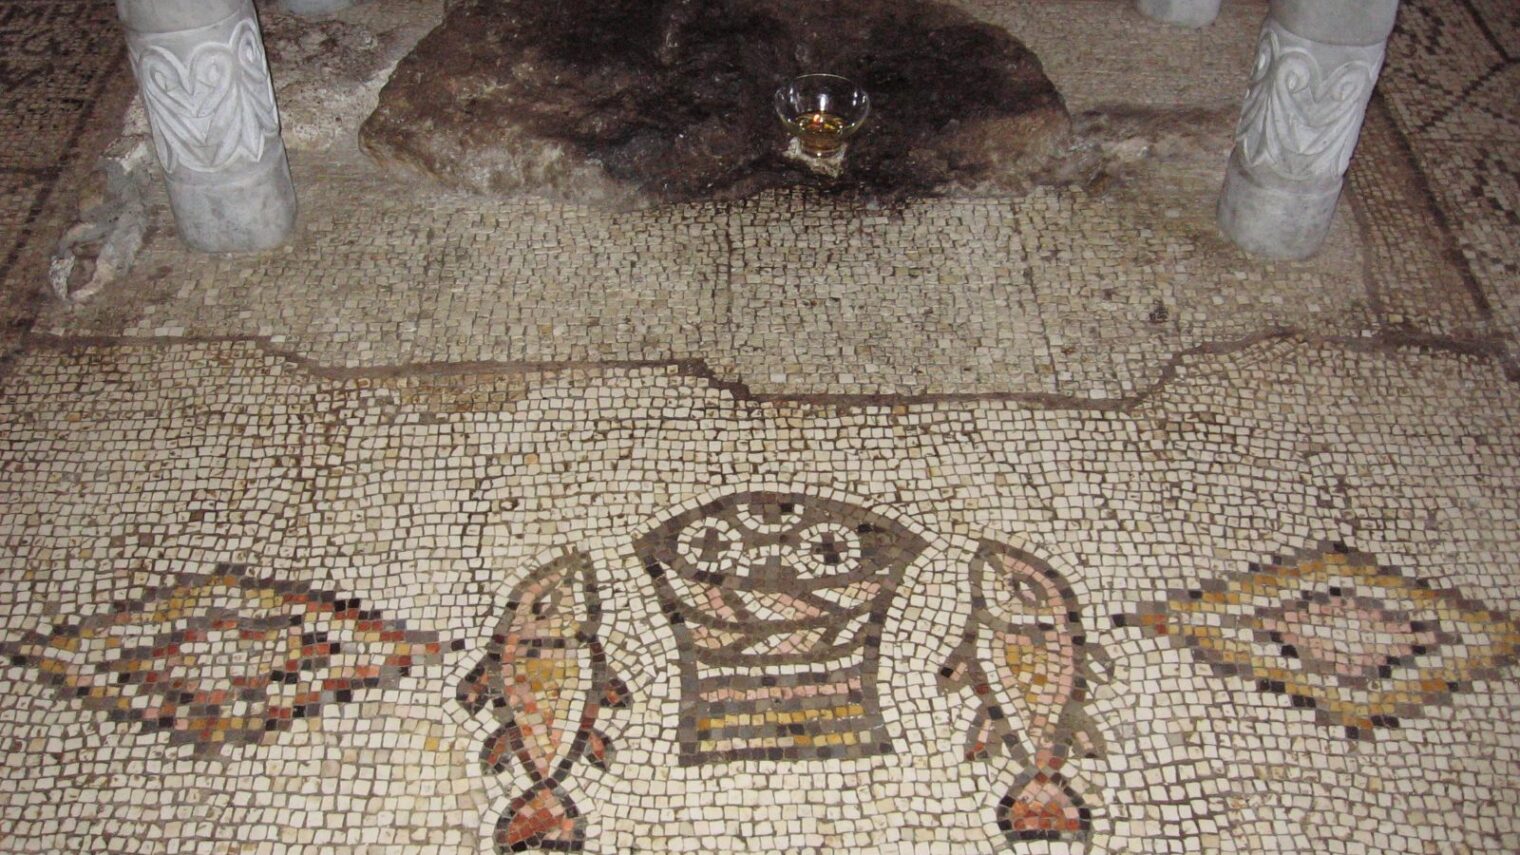 The Church of the Multiplication on the shores of the Sea of Galilee features a fifth century mosaic showing a pair of fish and a basket containing loaves of bread that represent the story of Jesus miraculously feeding the masses. Photo by Croberto68/Wikimedia Commons
How old is it?